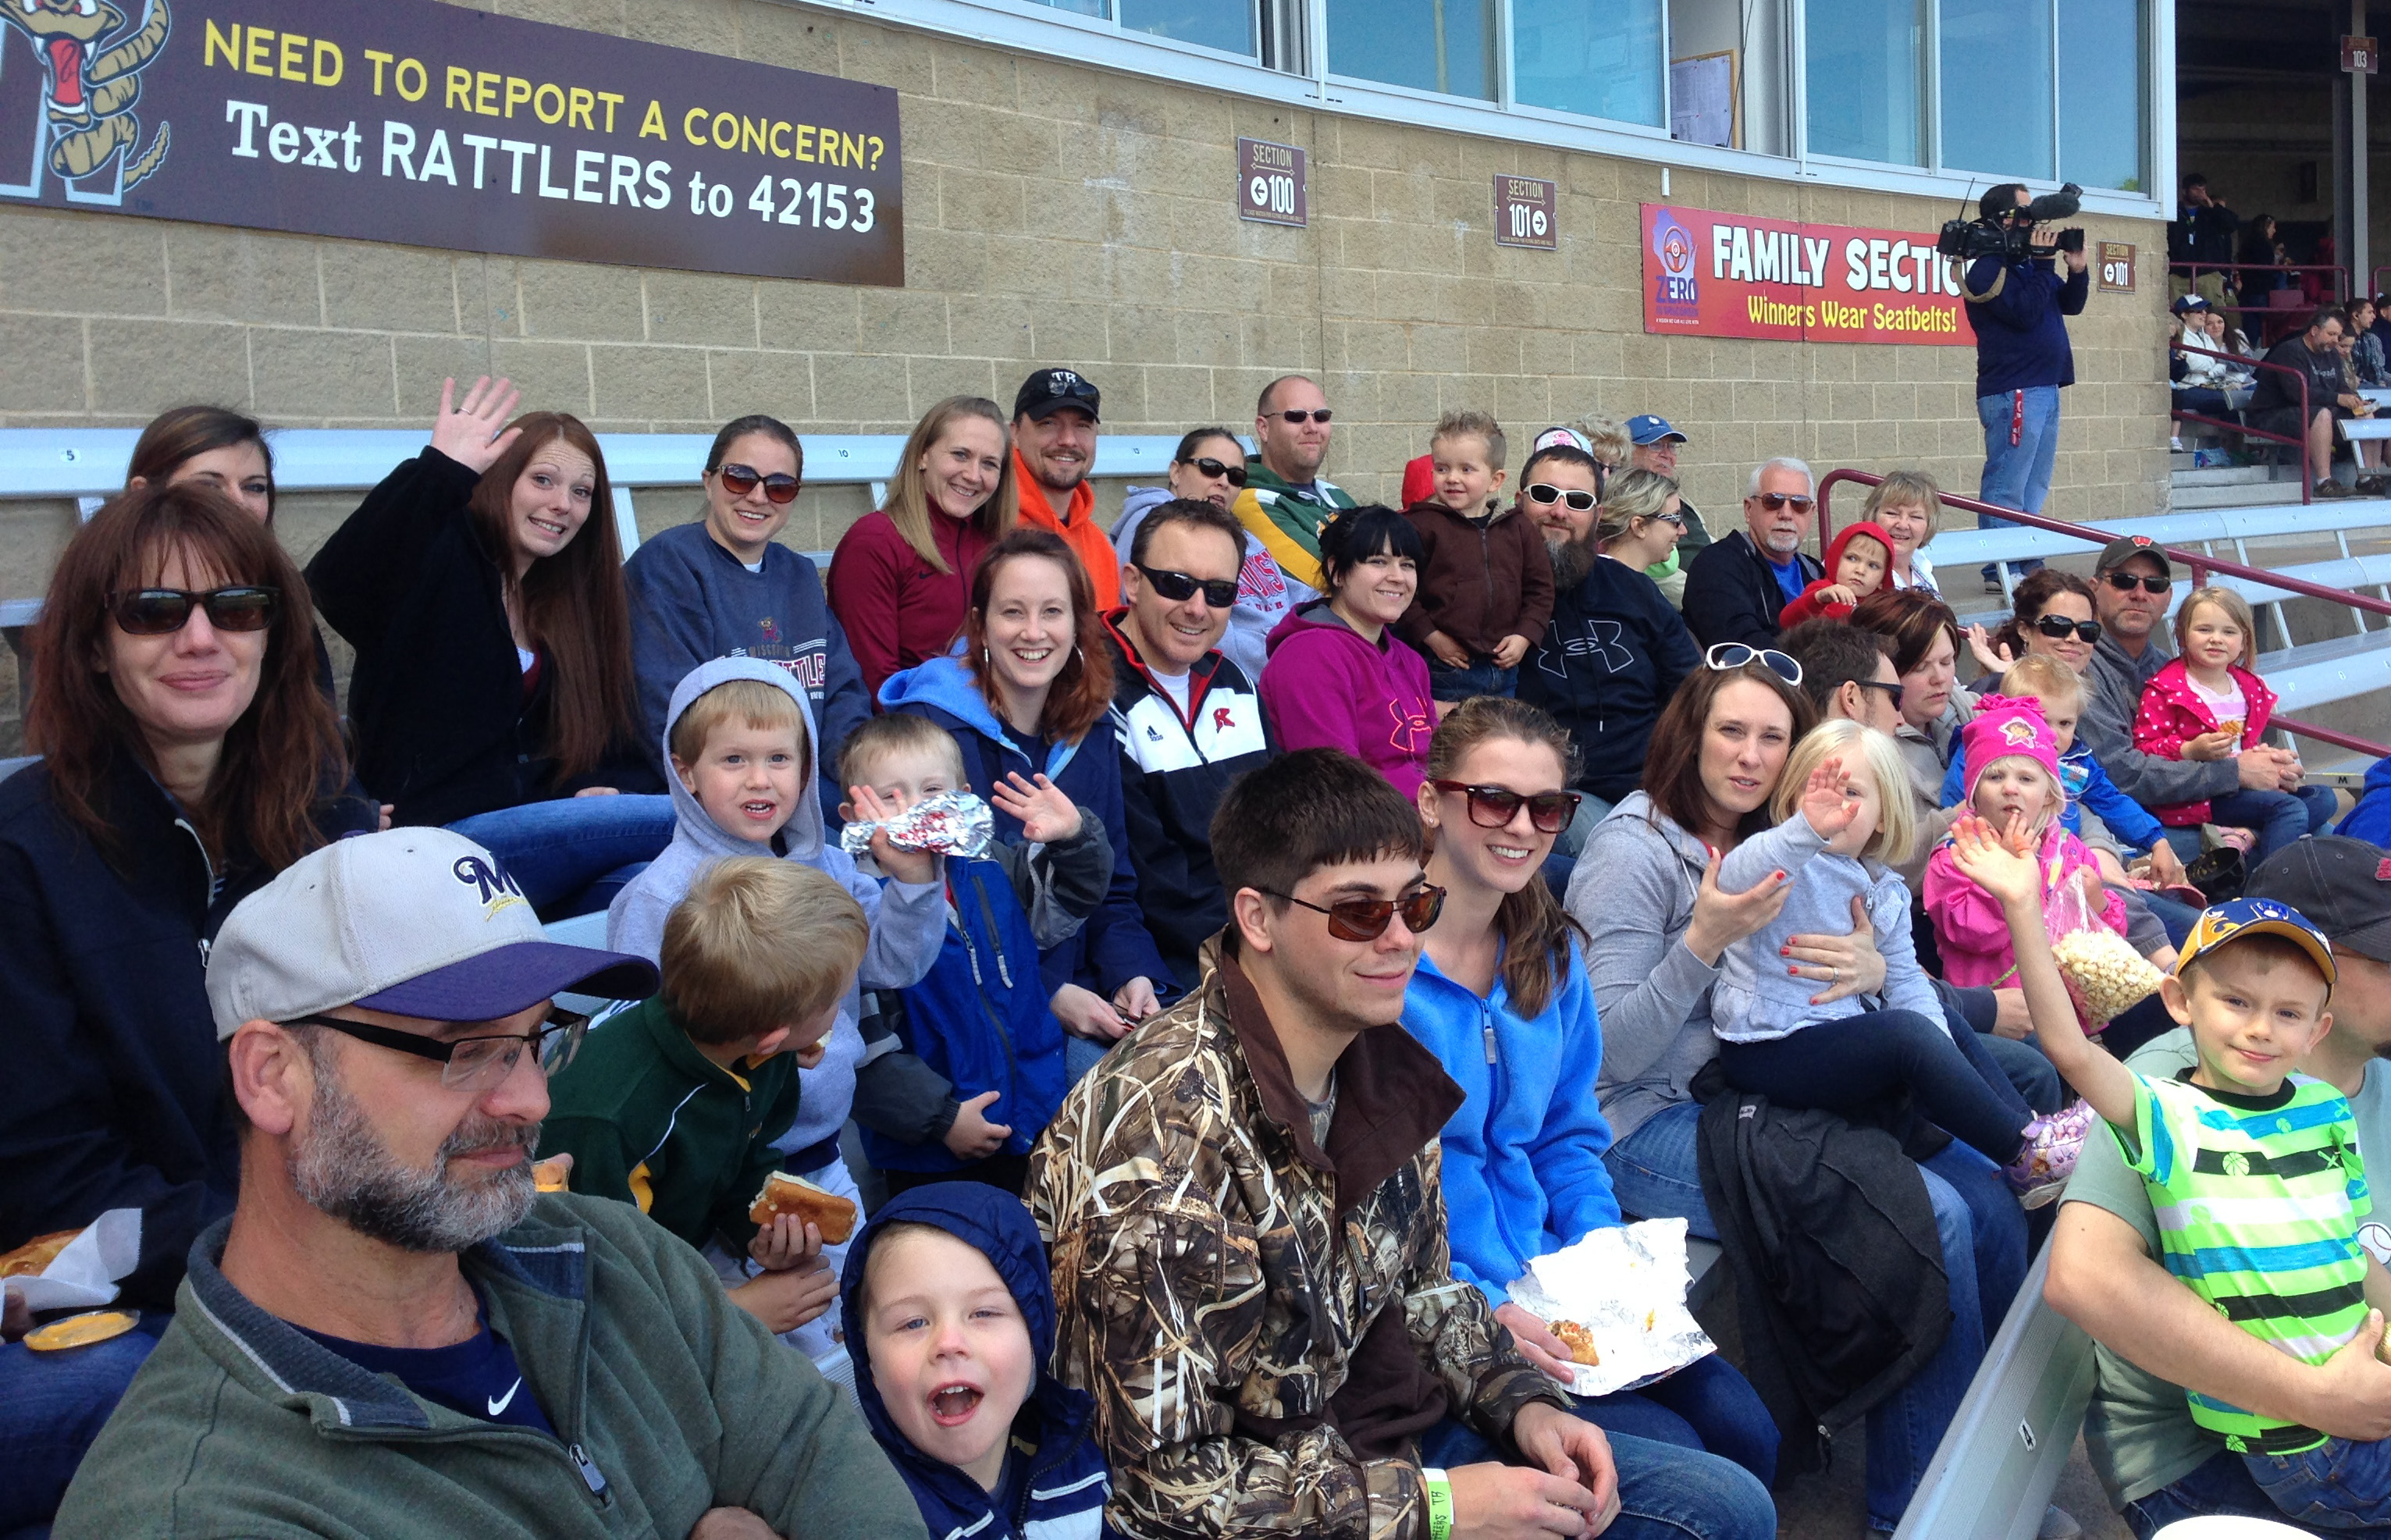 Community Child Care Center families attend baseball game